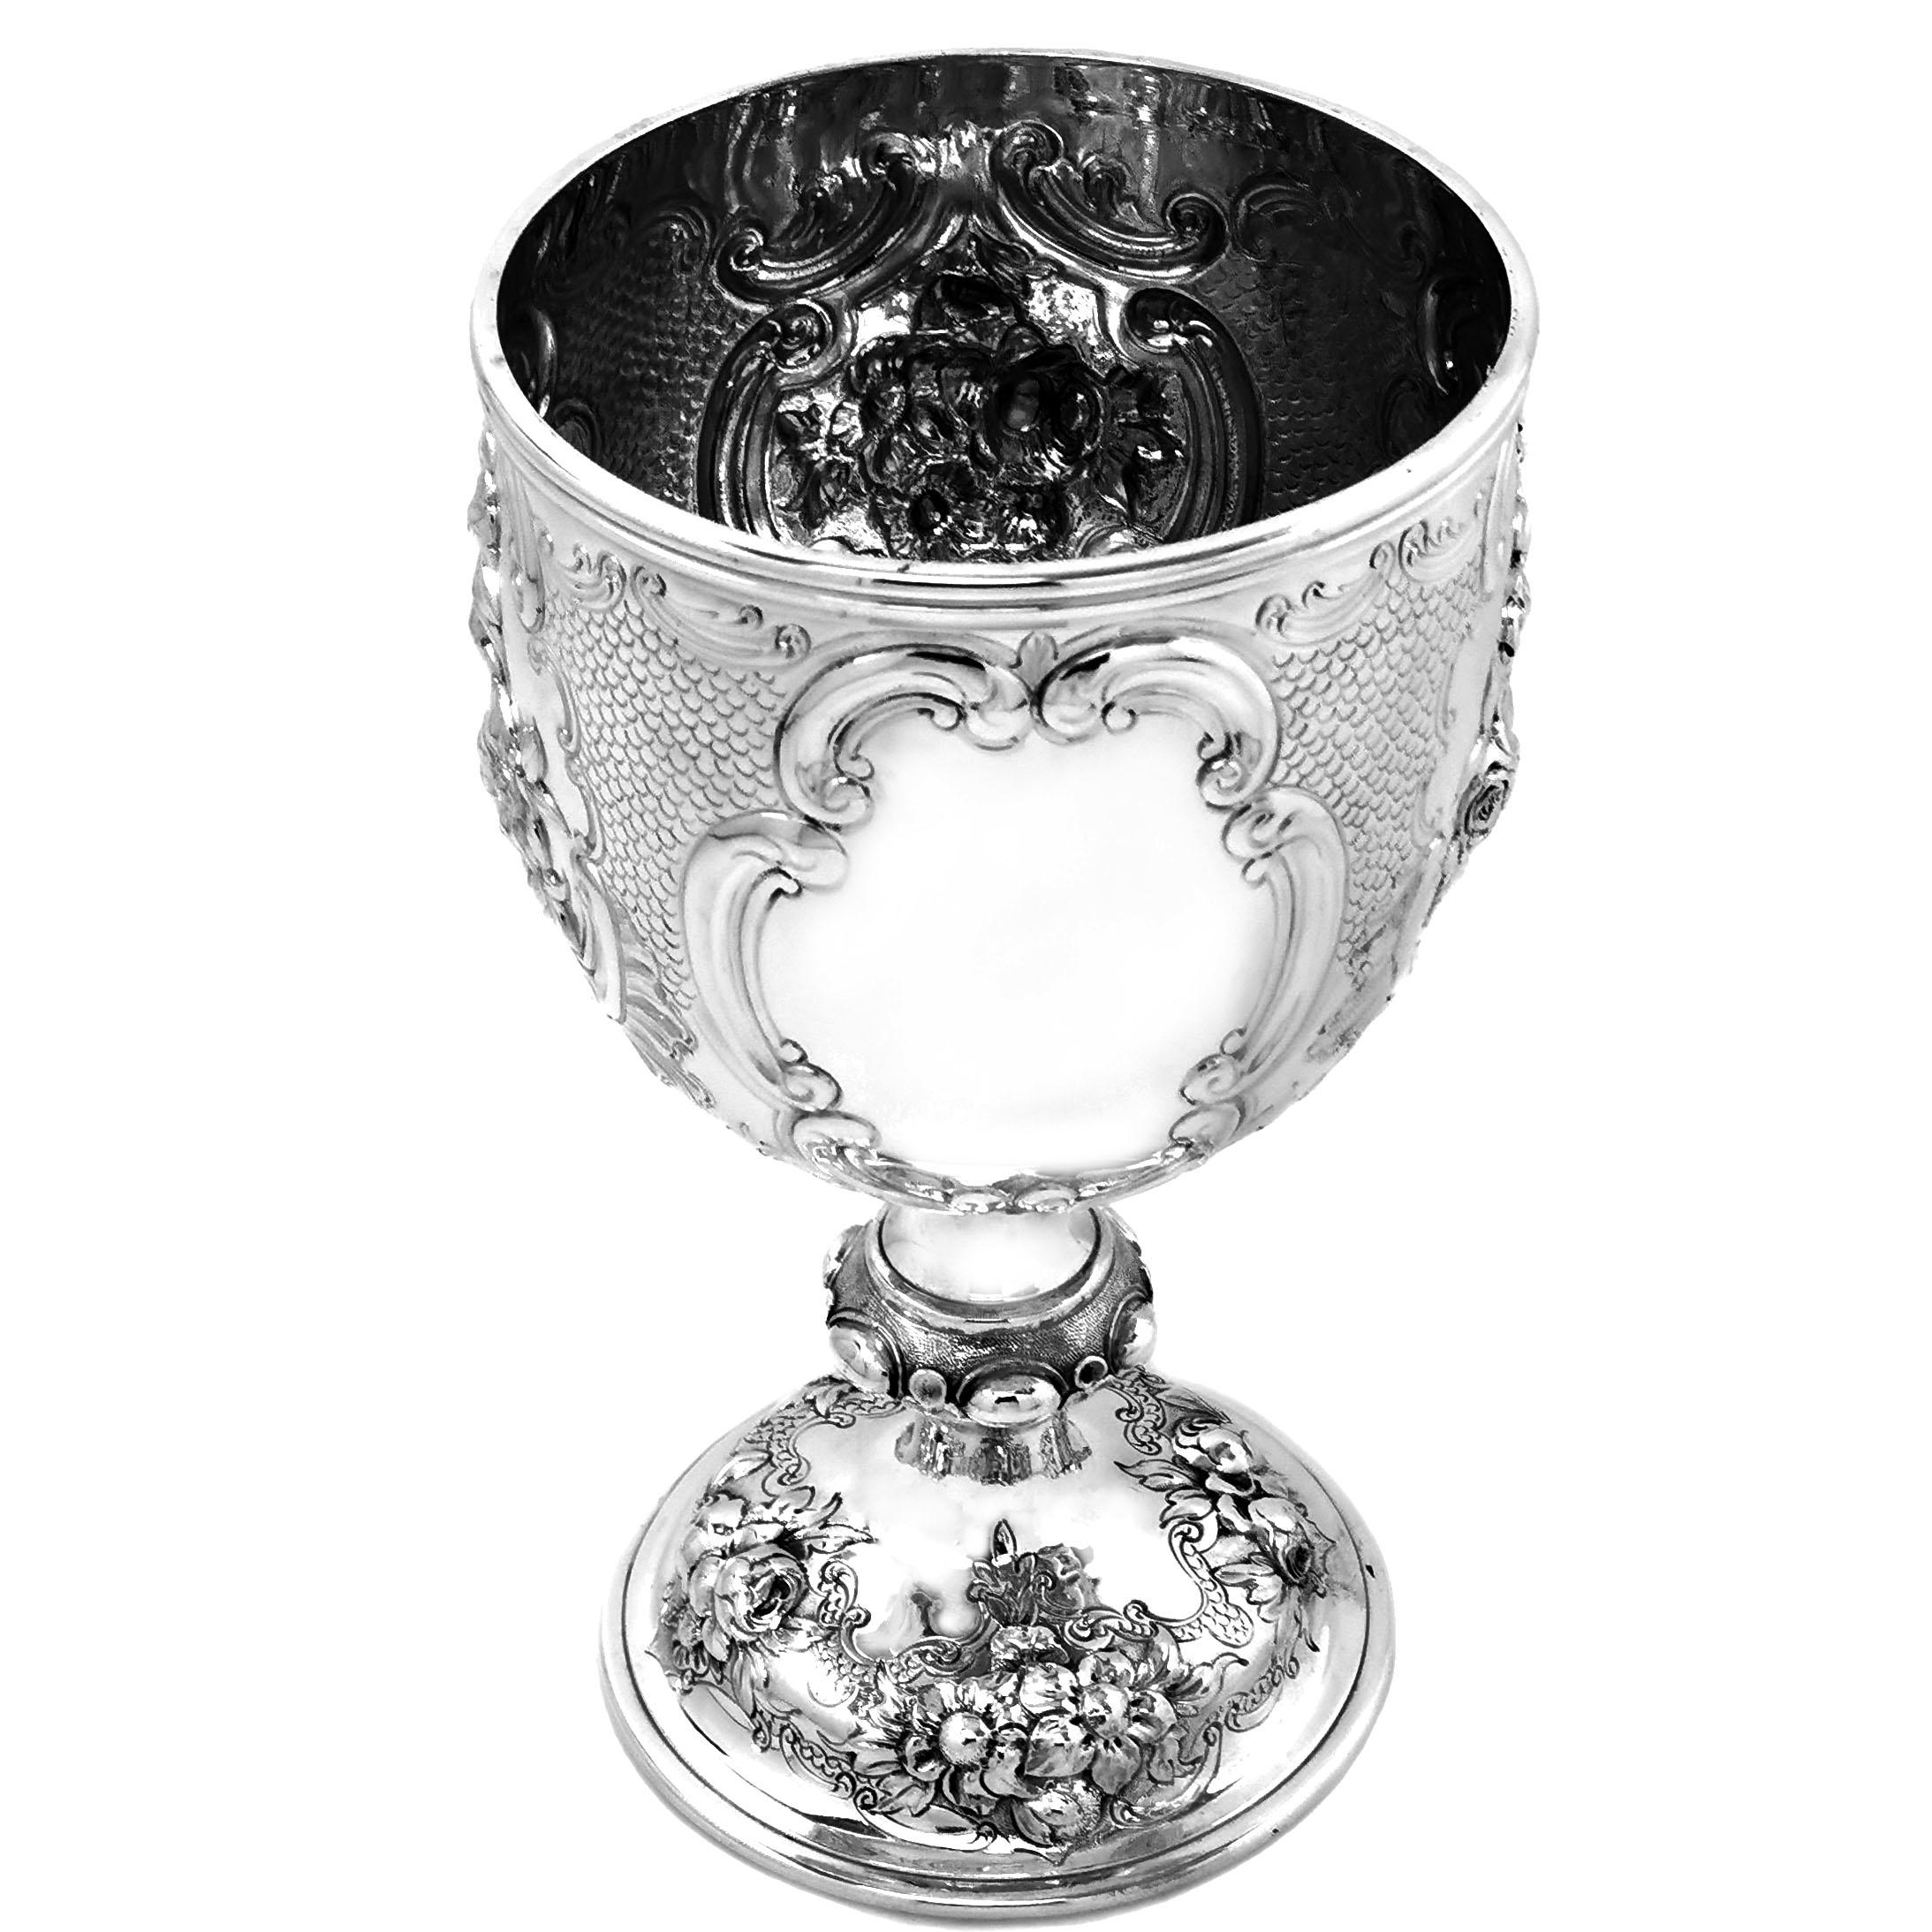 An impressive Antique Victorian solid Silver Goblet decorated with a rich variety of chased flowers. The cup features four shaped cartouches on the body, one plain and the other three featuring detailed chased floral arrangements. The foot of the